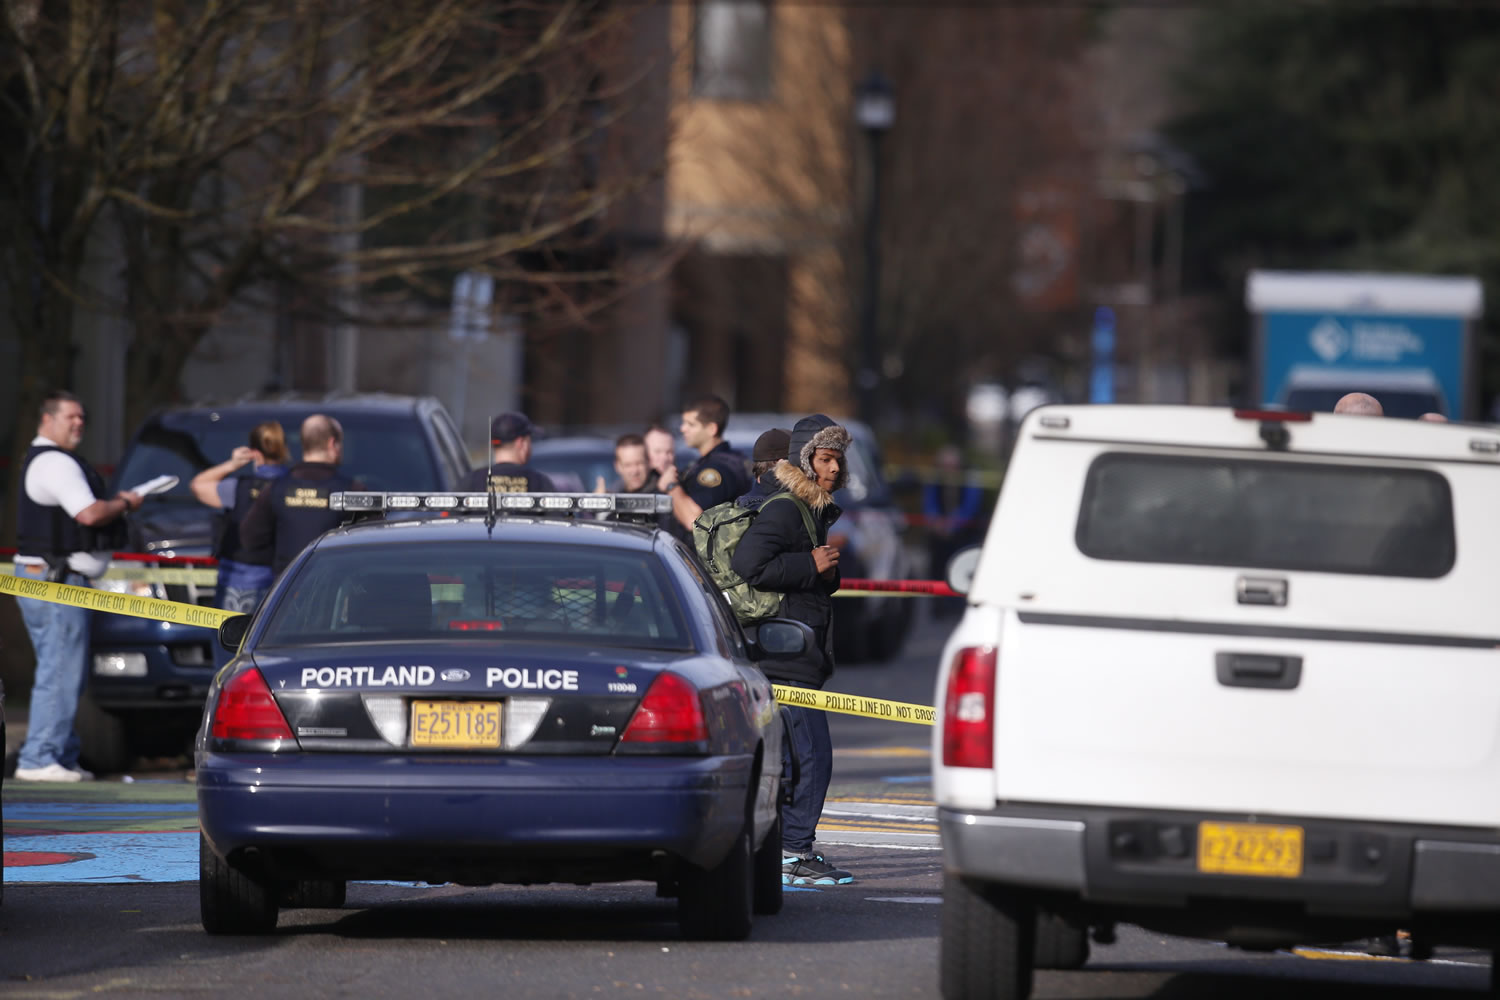 The scene in North Portland where a shooting occurred near Rosemary Anderson High School on Friday.